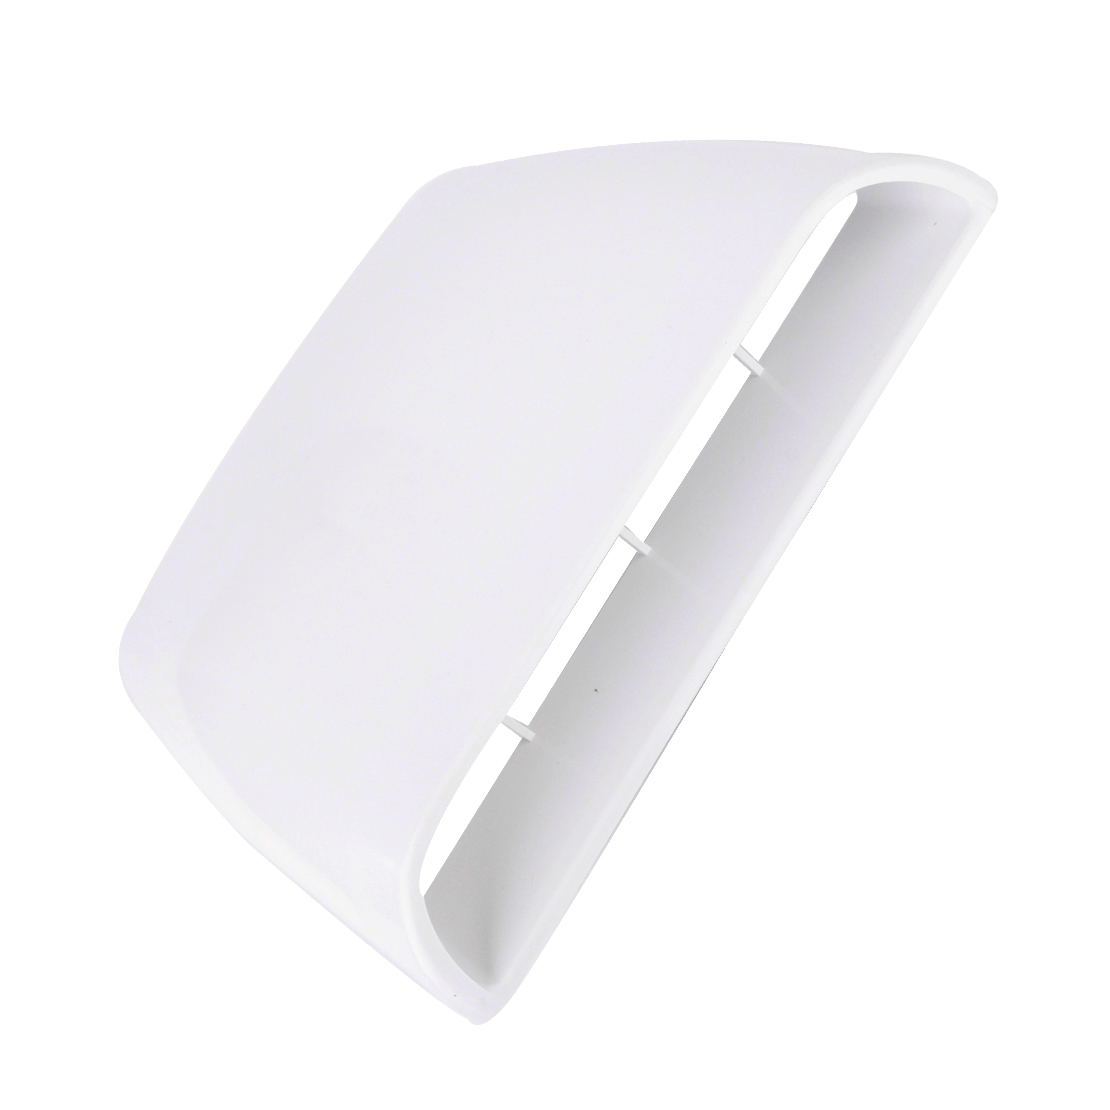 White Car Auto 4x4 Air Flow Intake Hood Scoop Vent Decor Cover Decal ttpp eBay